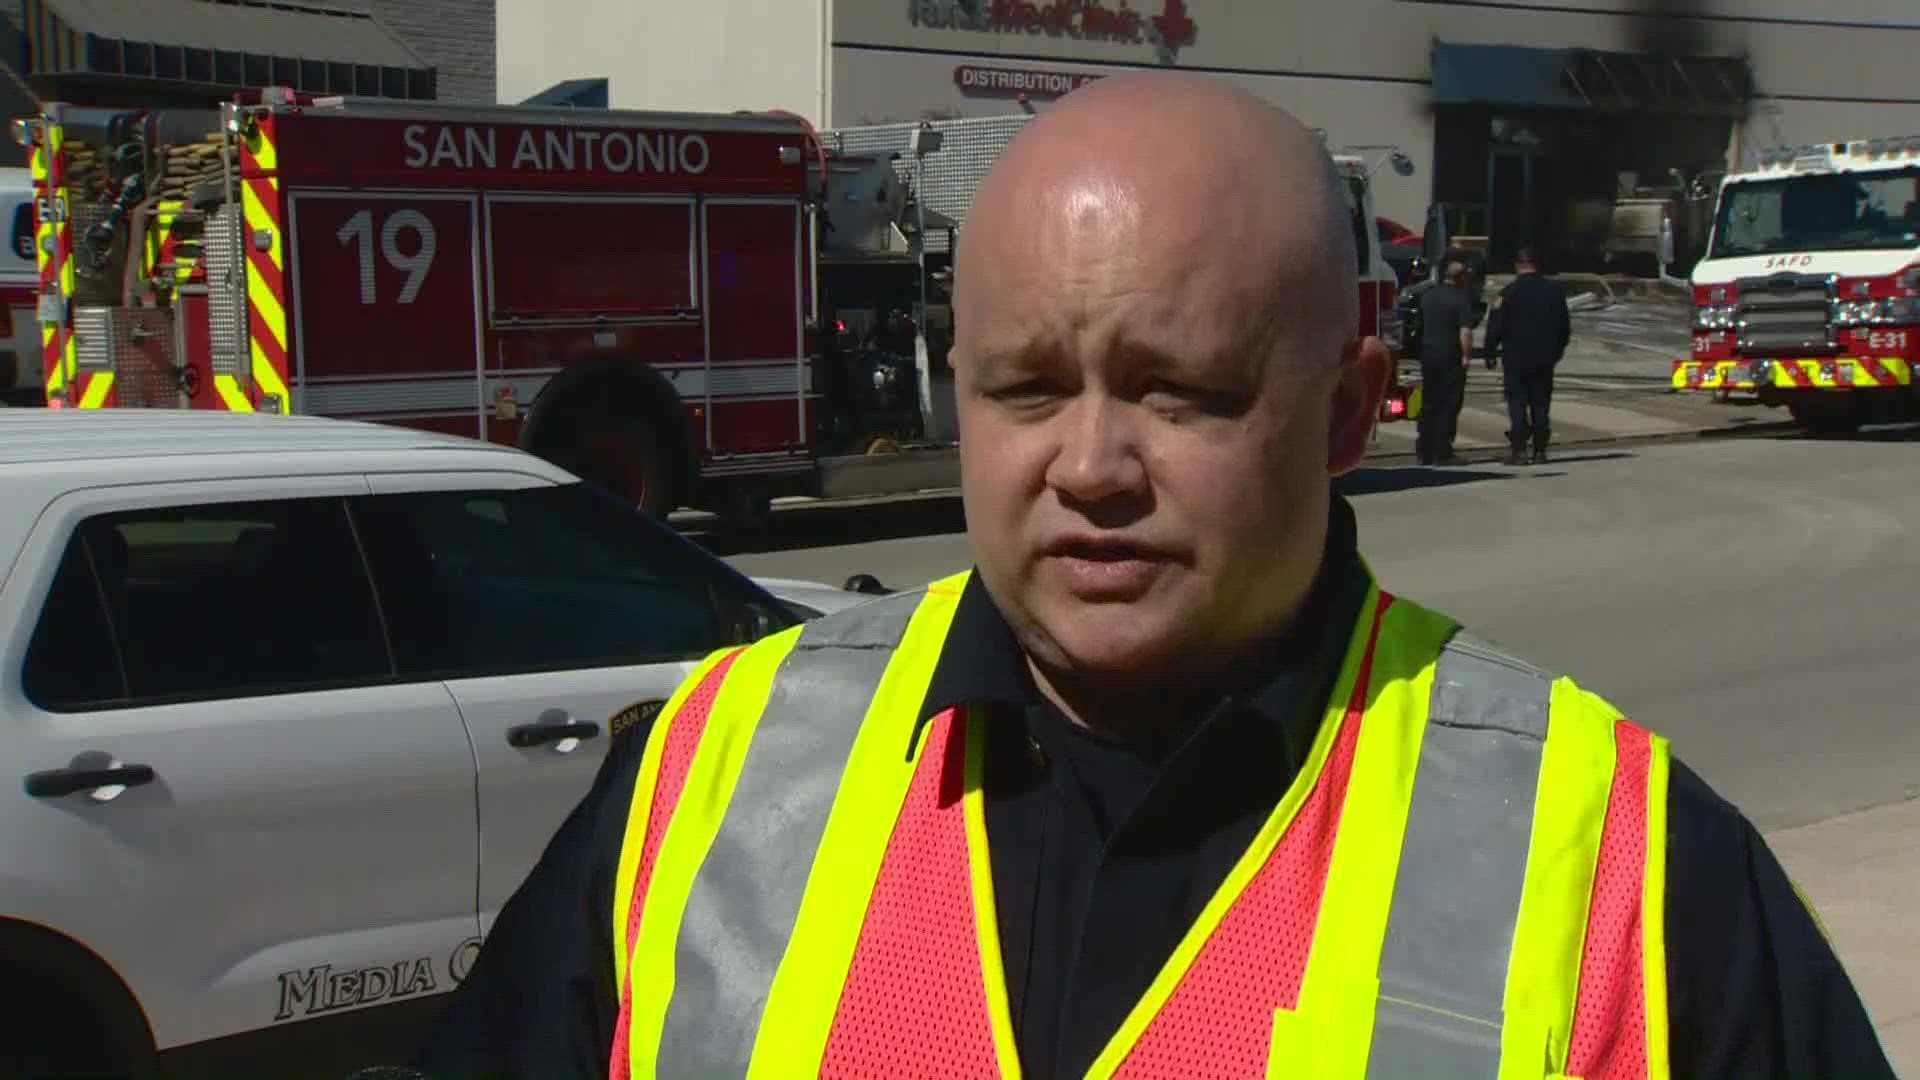 The employees at the Texas MedClinic Distribution Center were able to get out safely, fire officials said. The driver is expected to be alright.